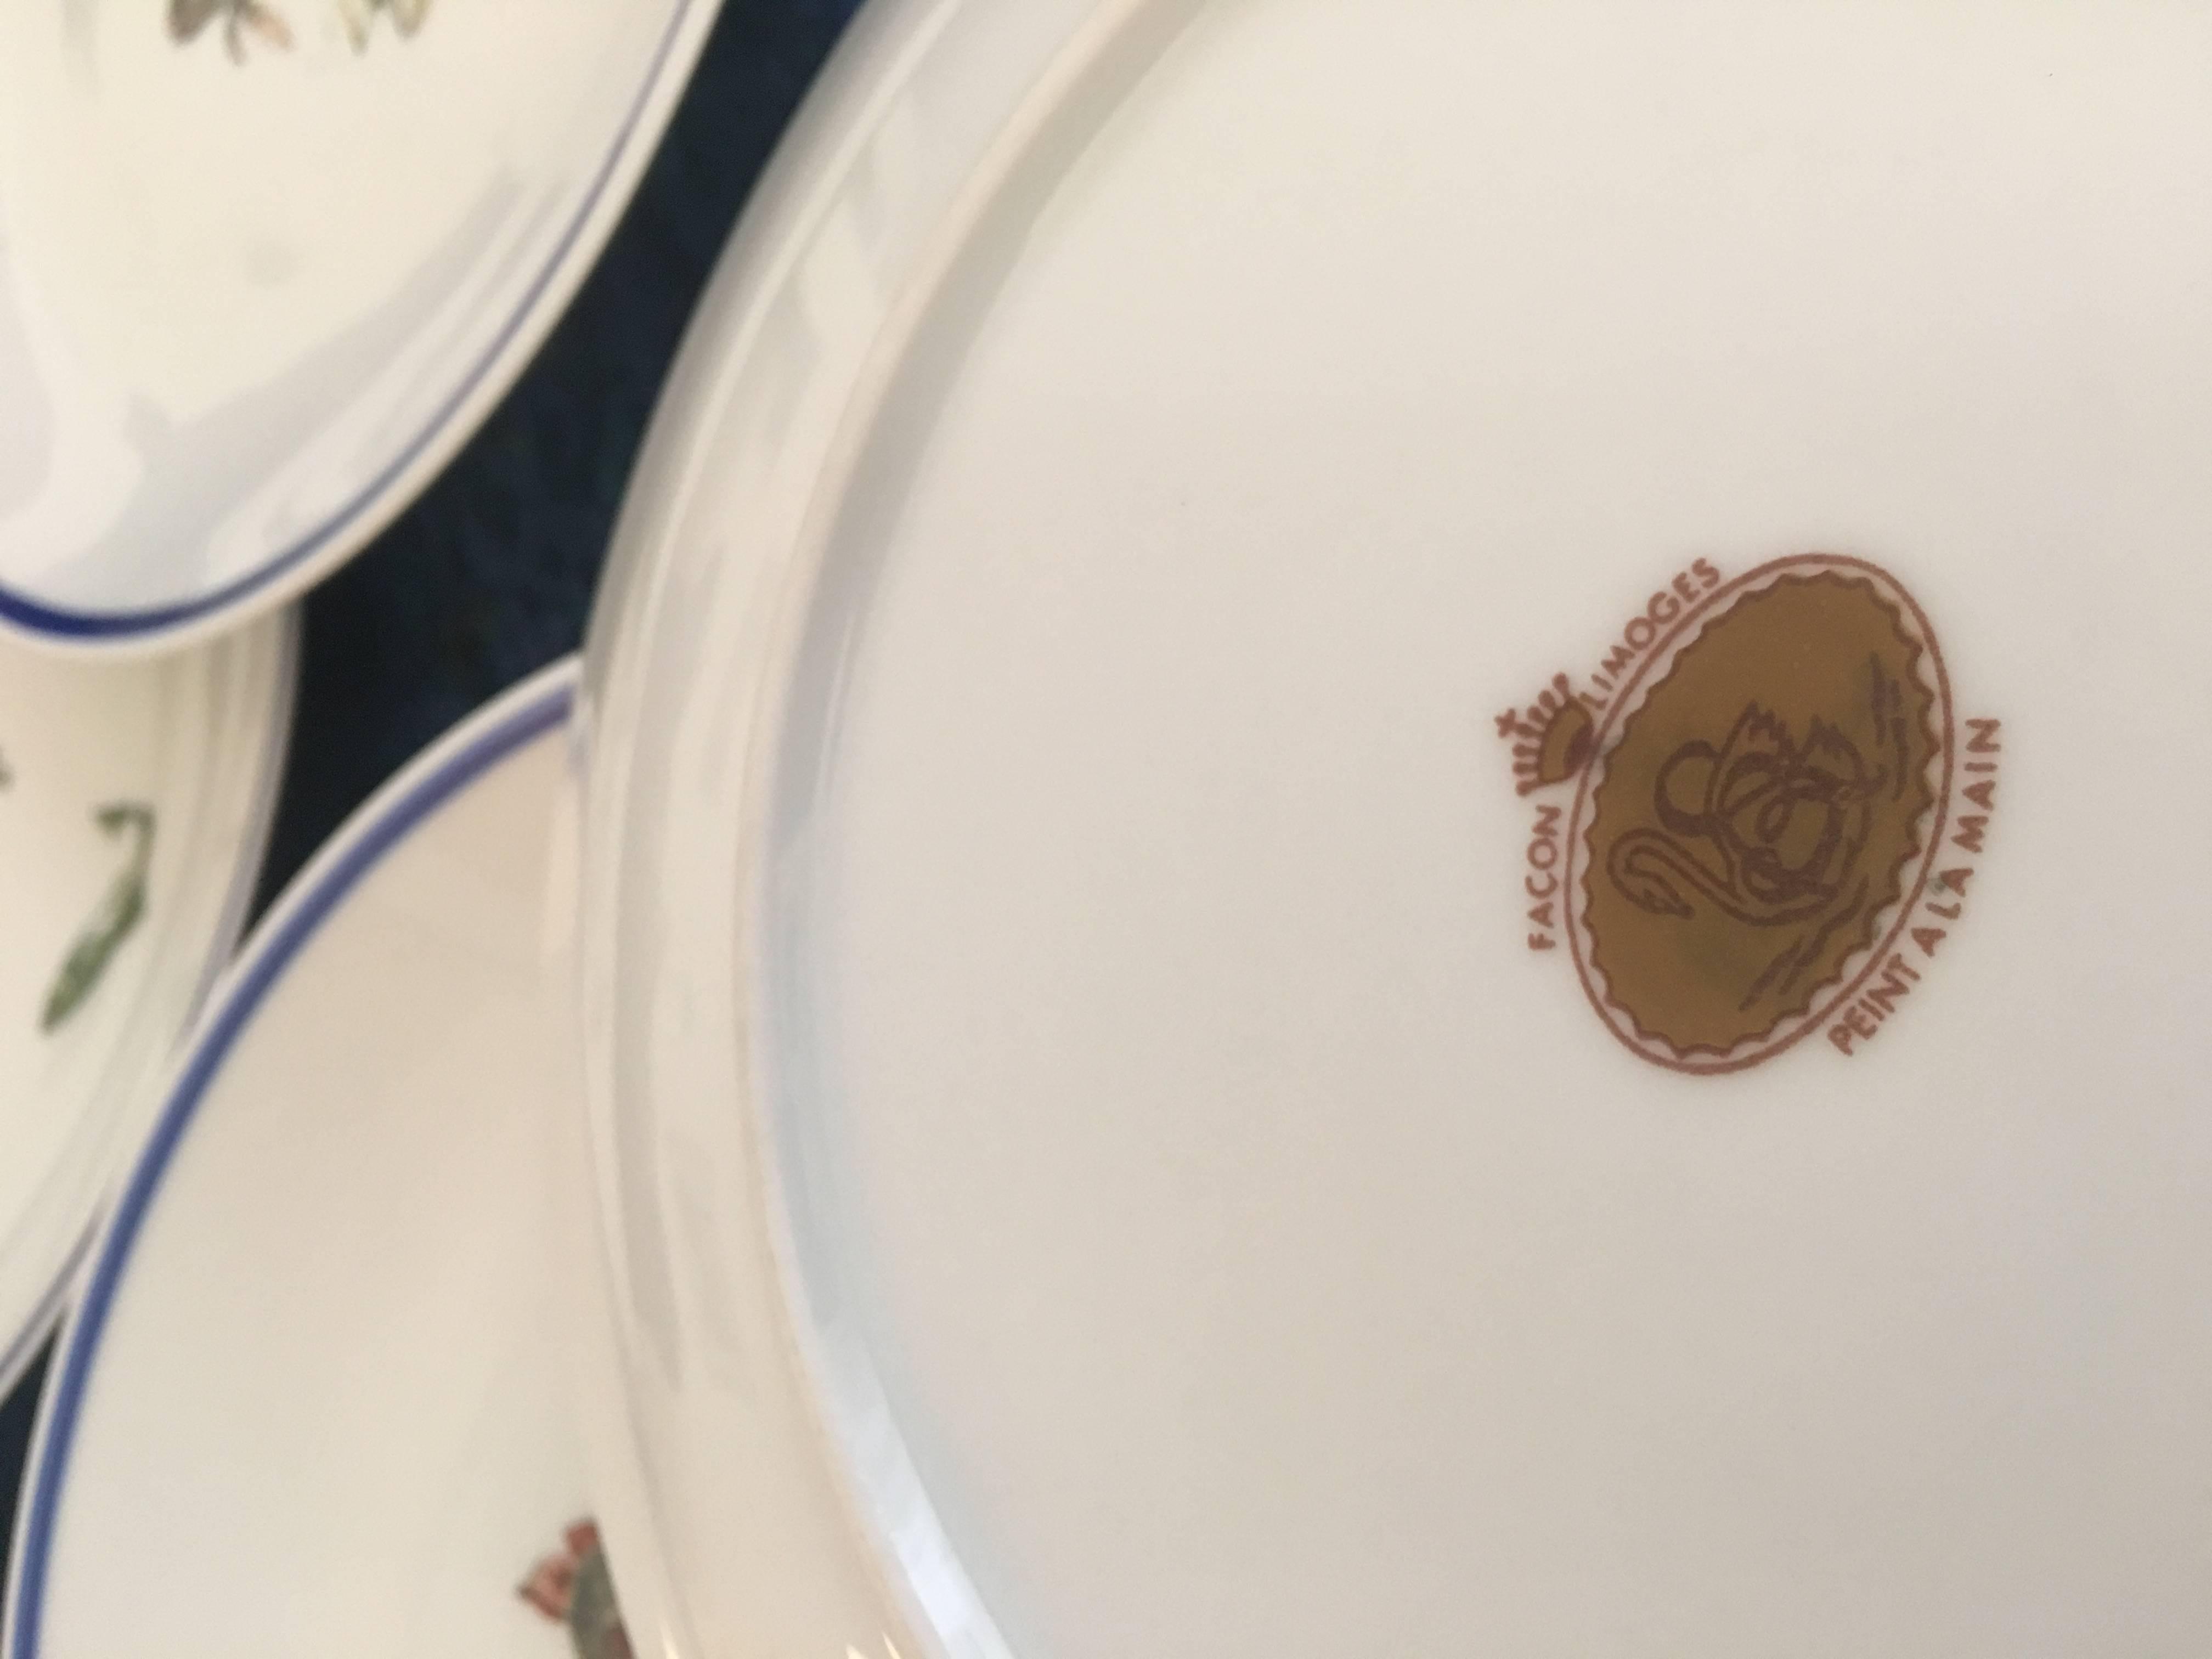 Nice vintage mid-20th century French porcelain dinner fish service set, seven plates, one large dish and six small. Transfer printed and later hand-painted.
Made in France, Paris.
The set is in mint condition.
Porcelaine - Fabriquee a Vierzon